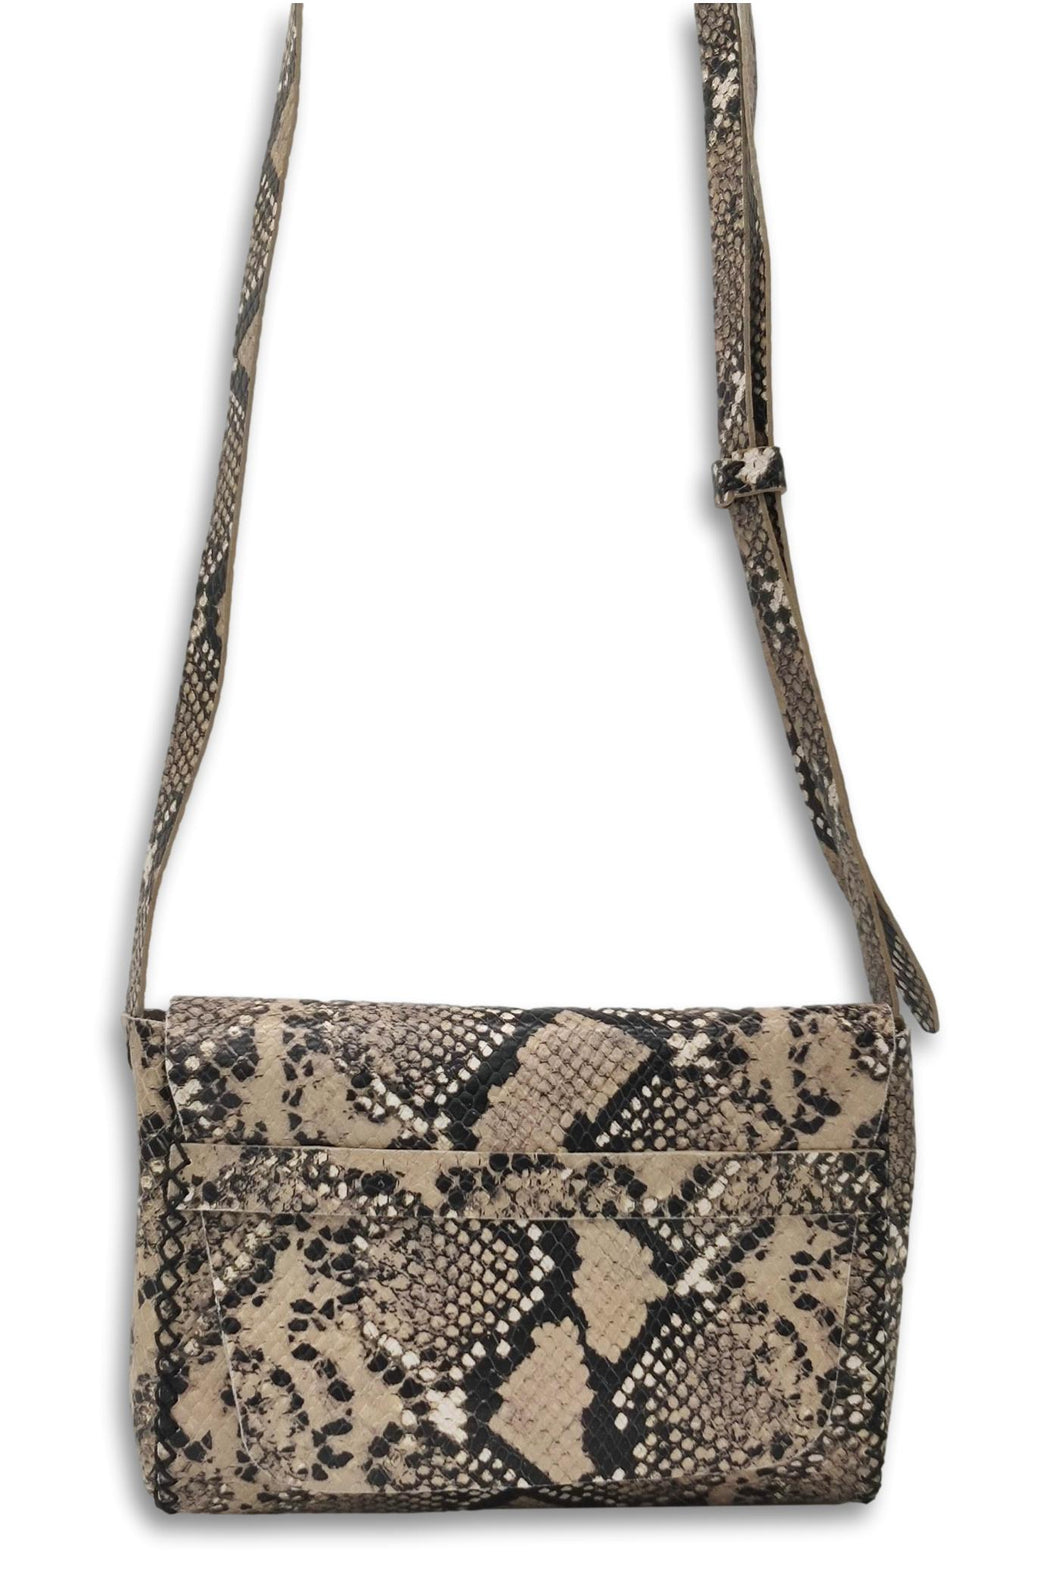 mauá | beige and black snake-embossed leather